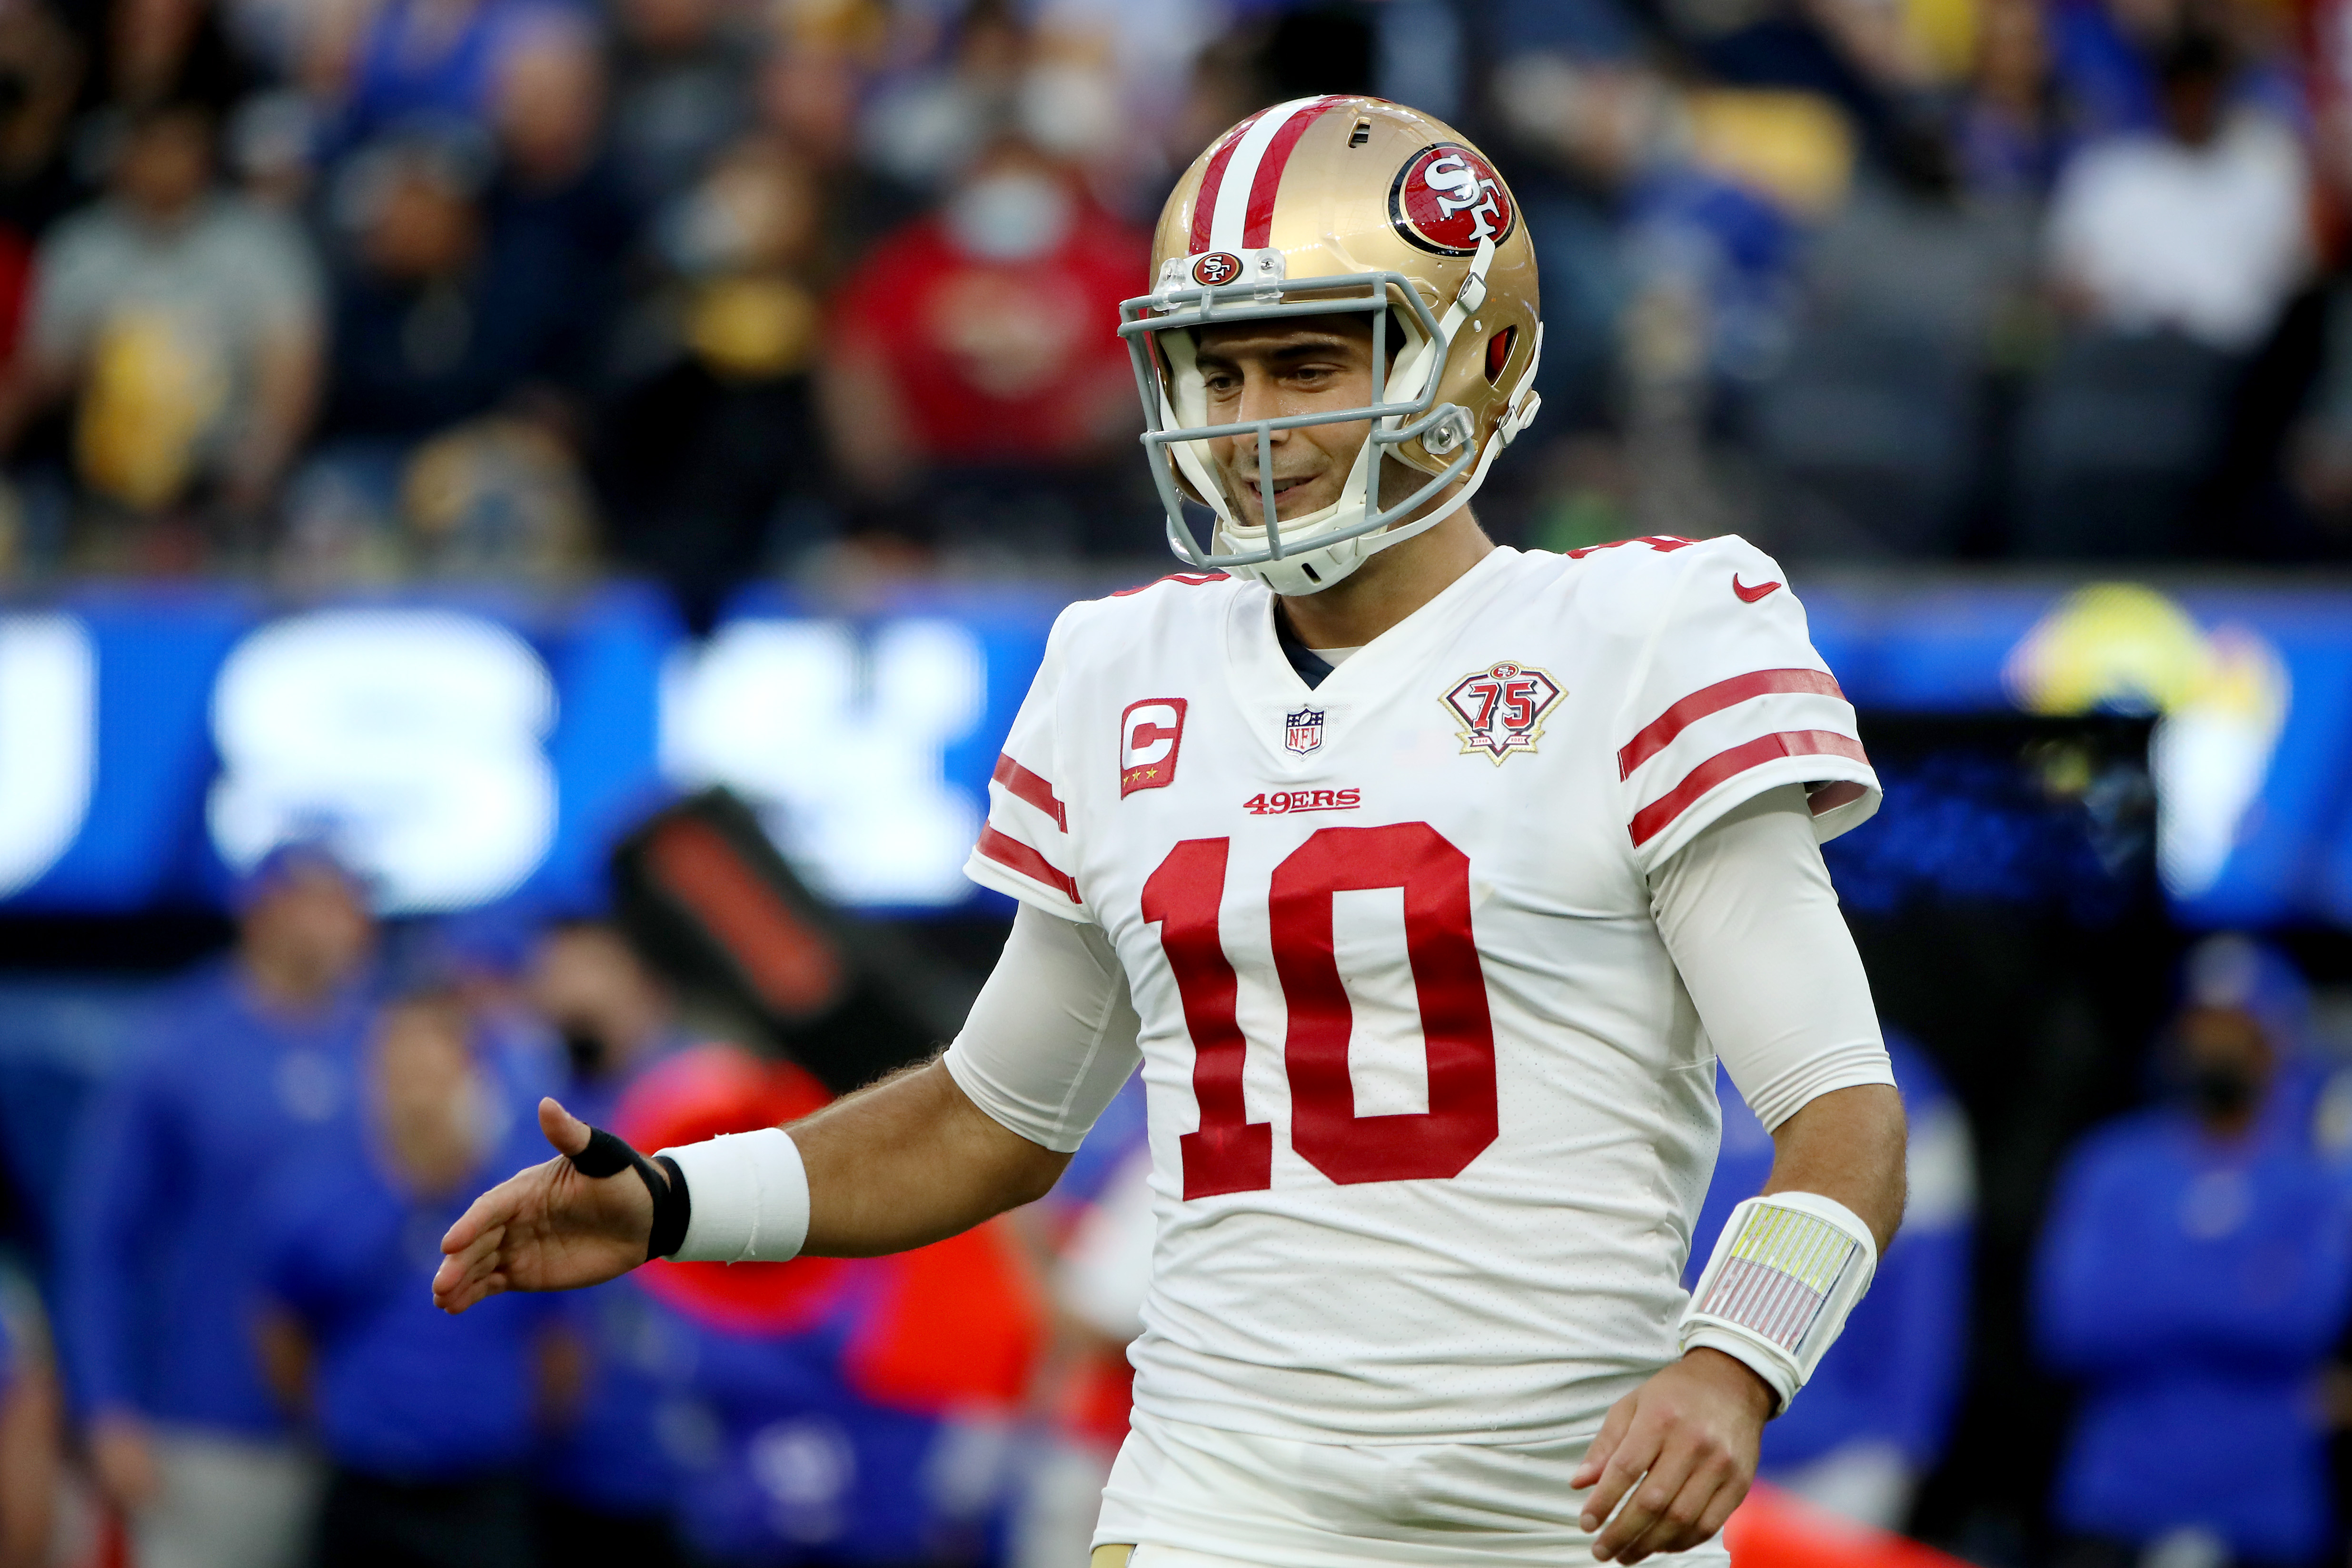 Ranking the playoff clashes between the Packers and 49ers